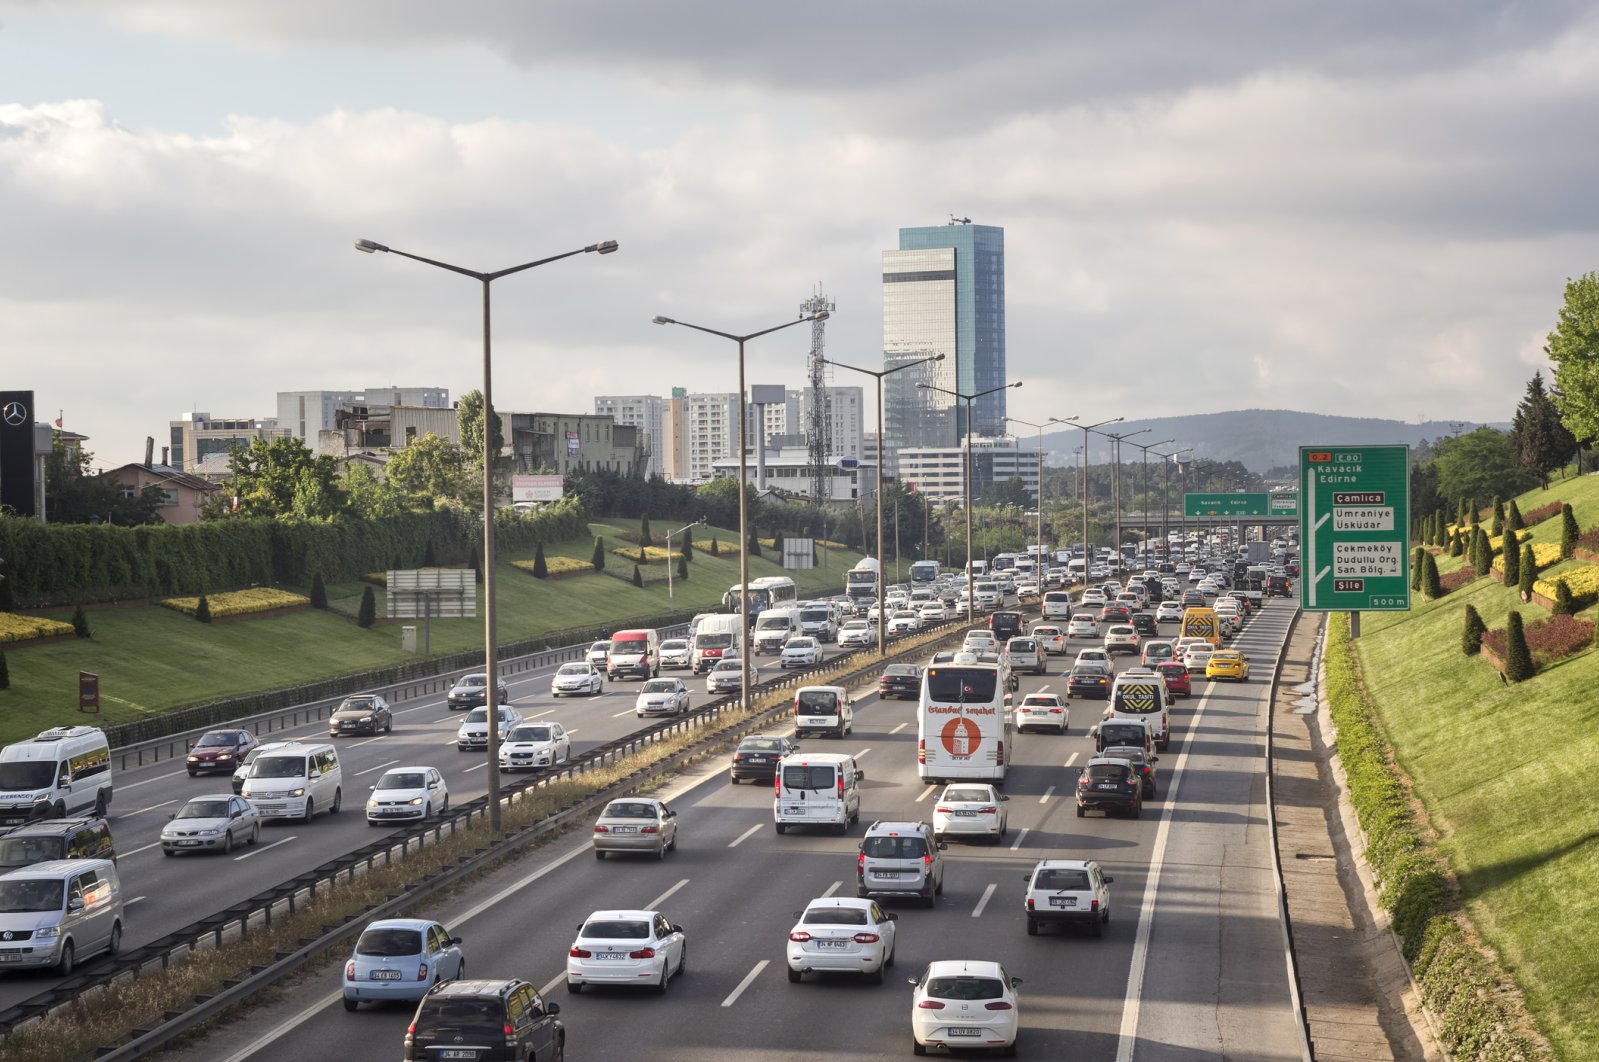 Traffic flows smoothly on a highway in Turkey's metropolis Istanbul, May 15, 2017. (iStock Photo)